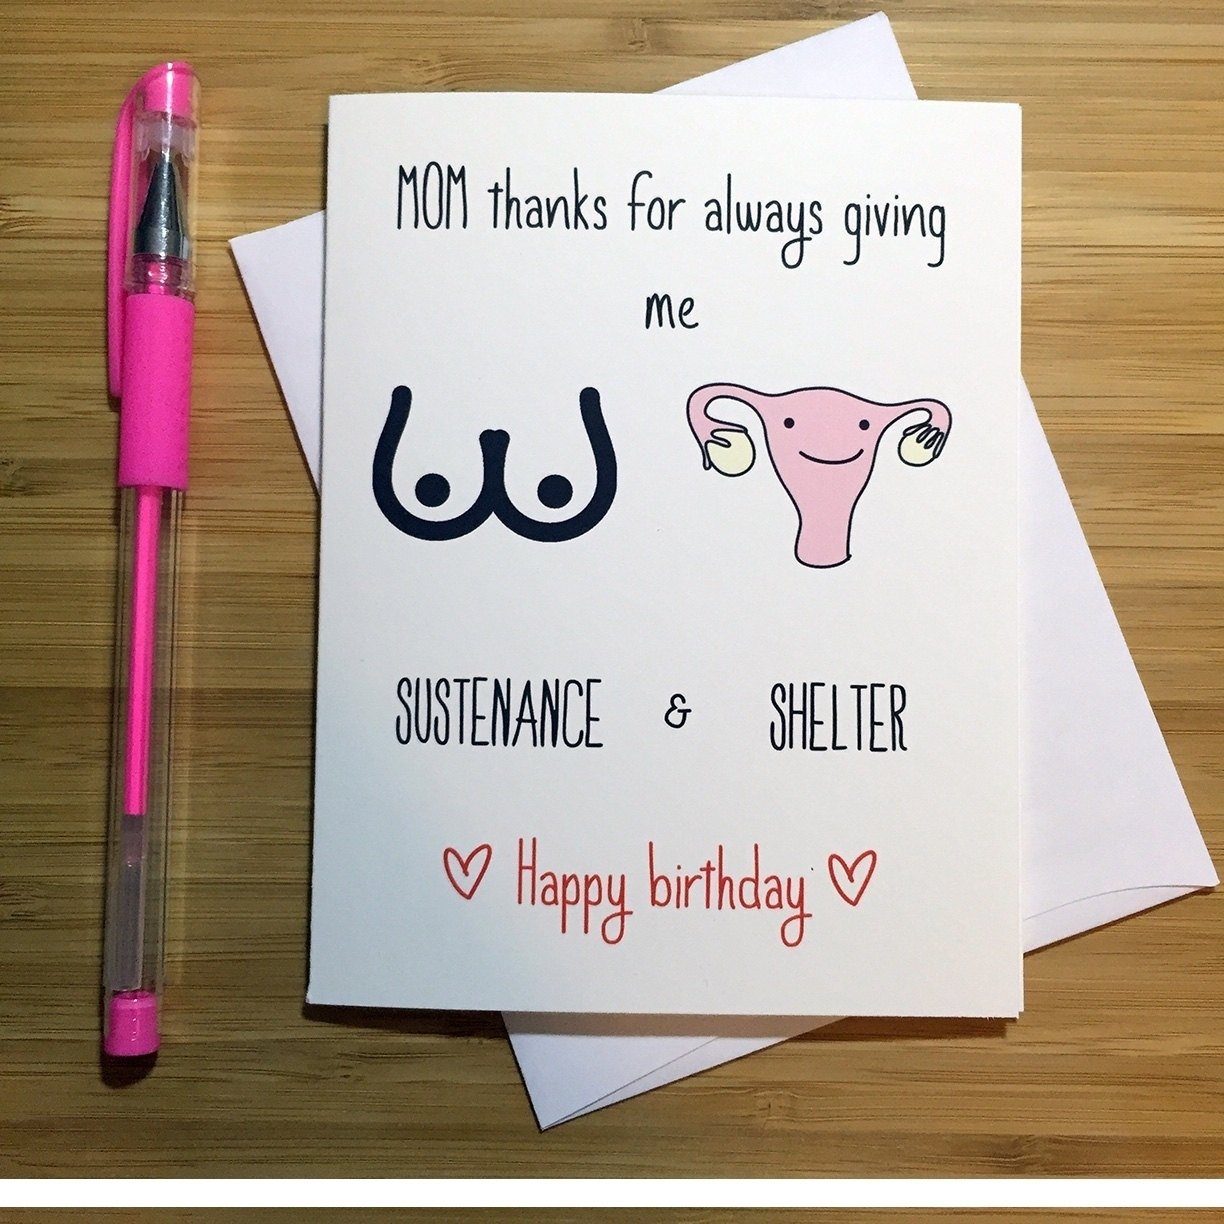 10 Trendy Cool Ideas For Birthday Cards cool birthday card ideas awesome cool happy birthday card ideas 2022